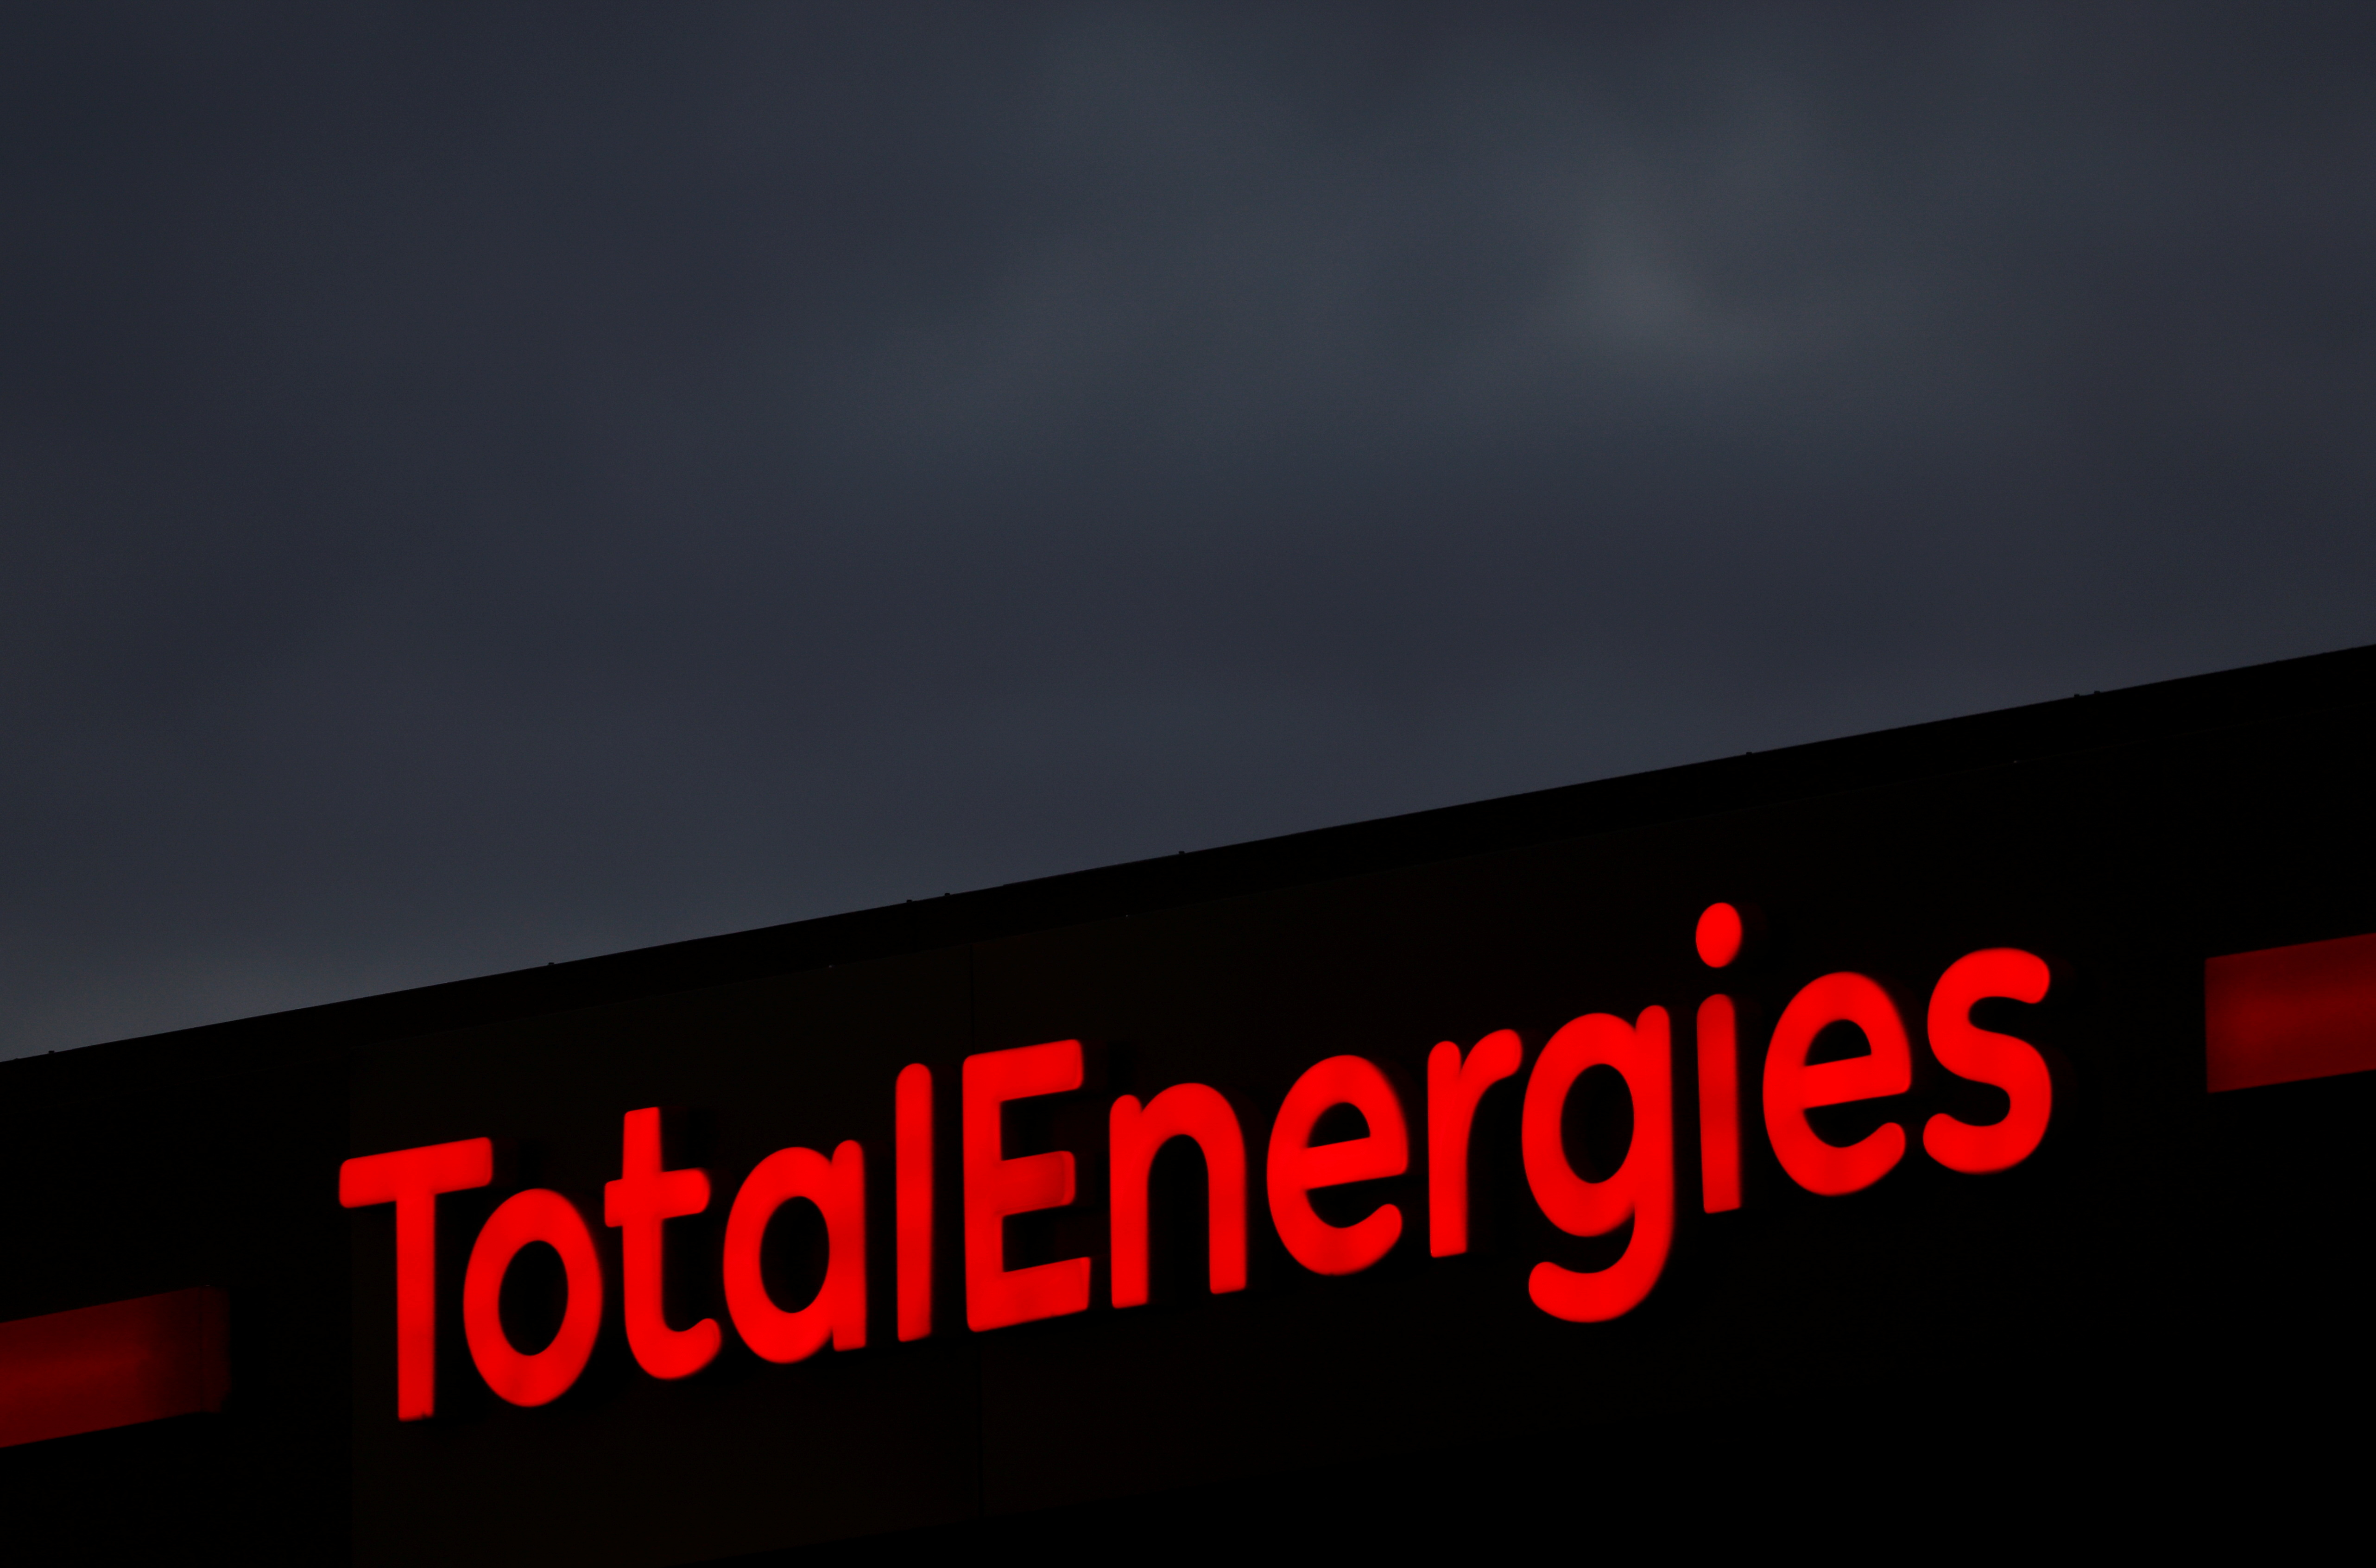 The logo of French oil and gas company TotalEnergies is pictured at a petrol station in Reze